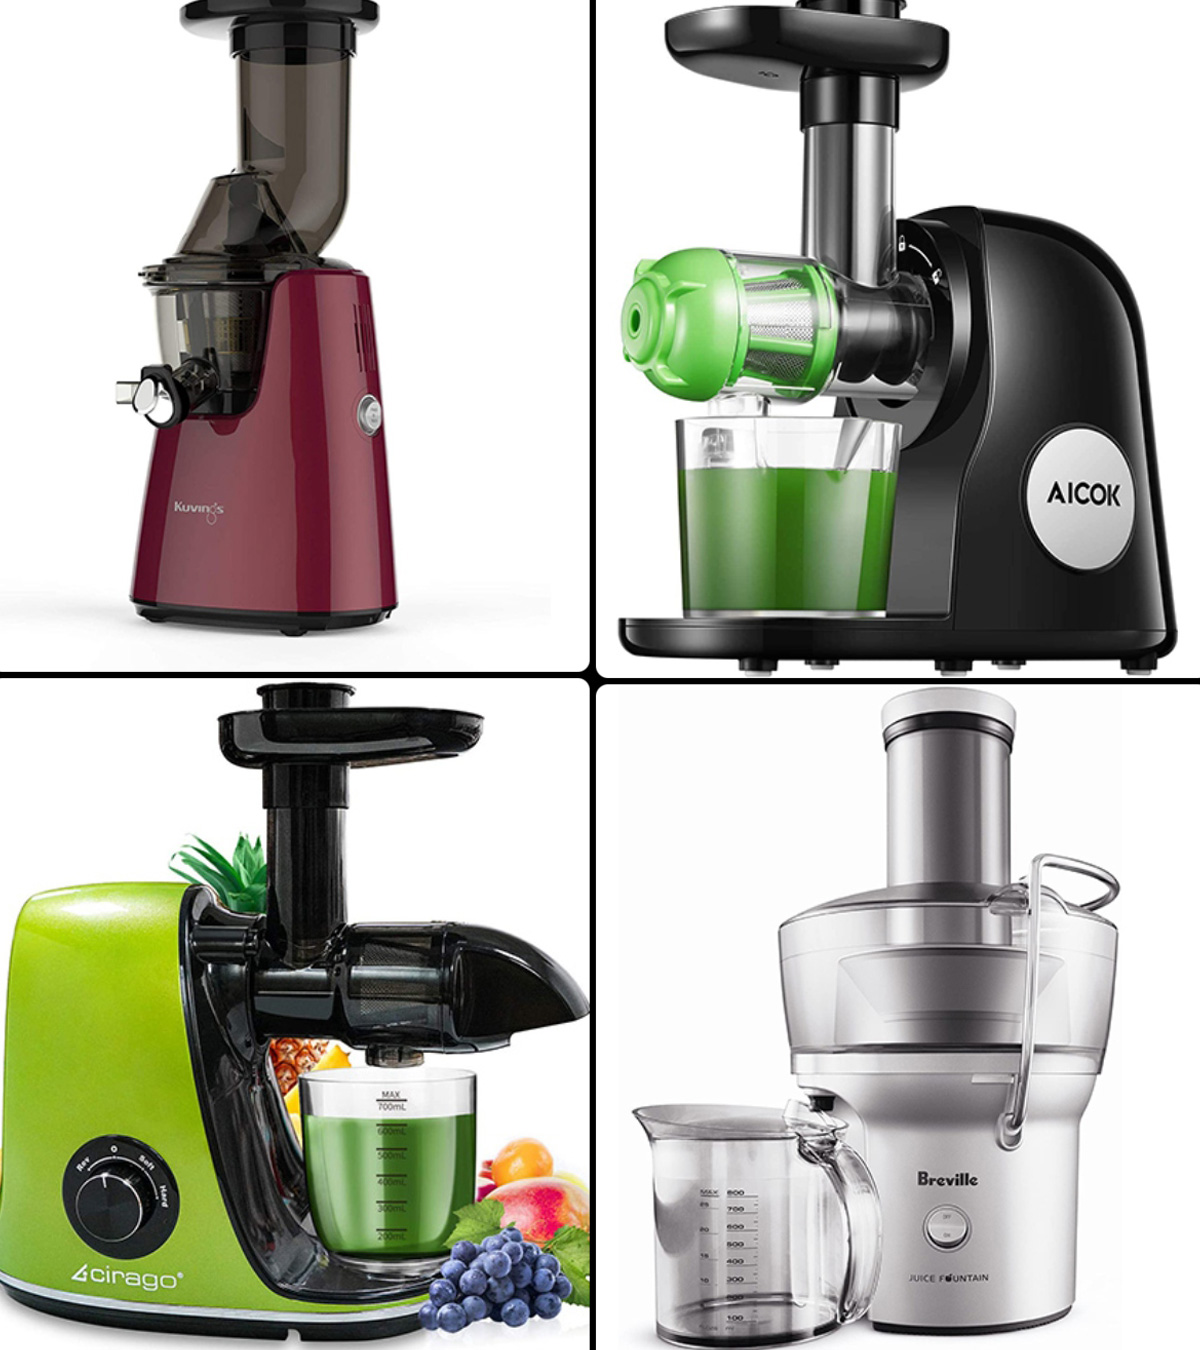 Which is the cheapest and best juicer? - Quora